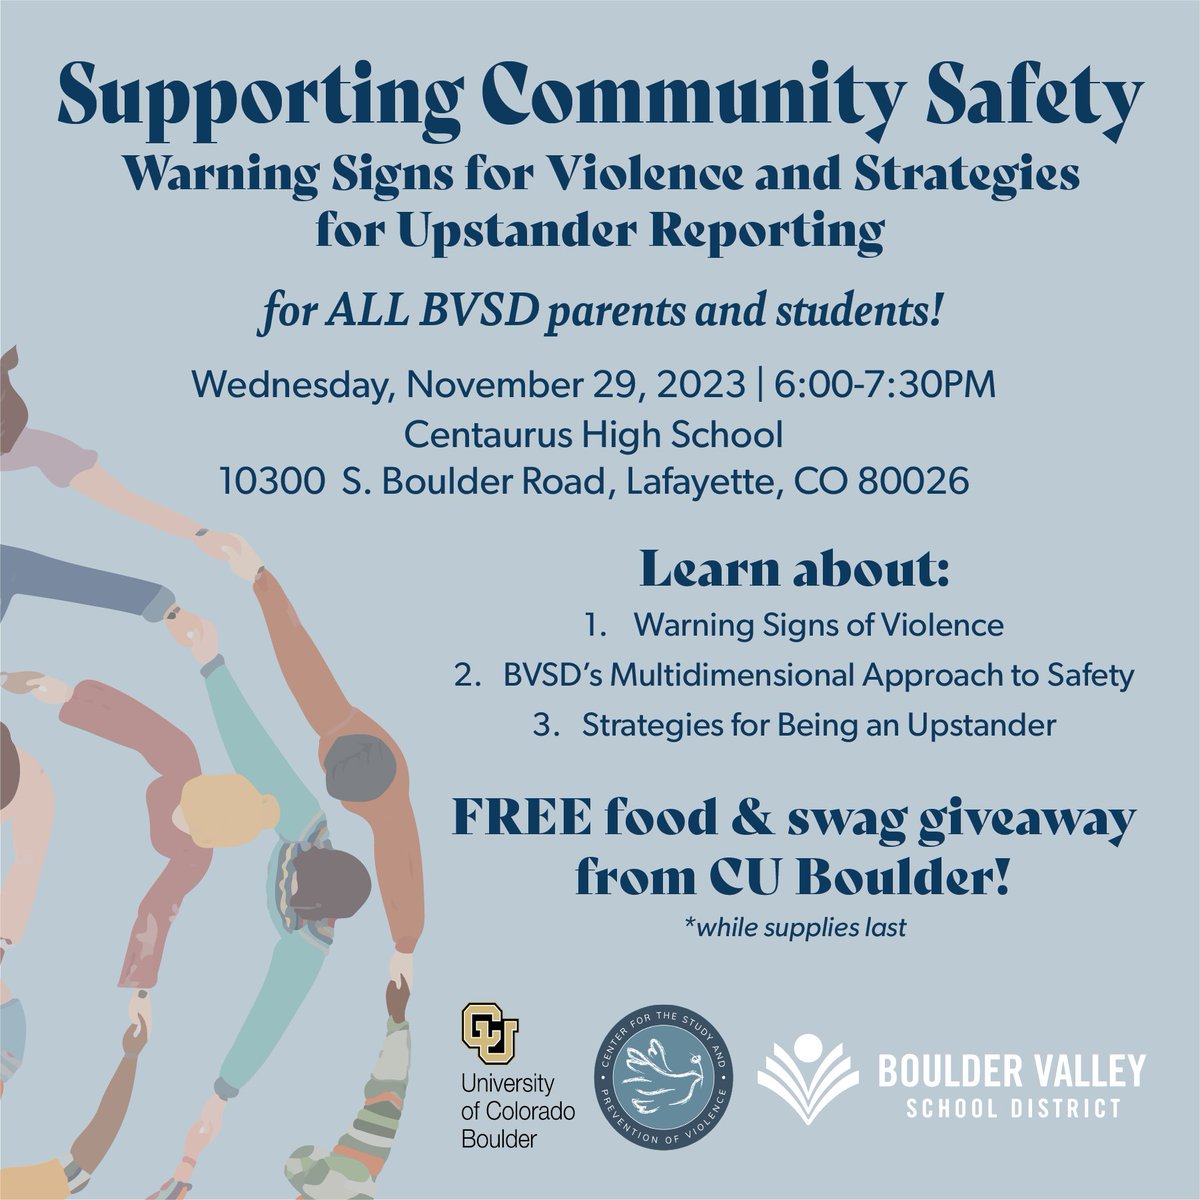 Are you a BVSD parent, student or family member? Please join us to support community safety on Nov. 29! This special presentation is part of ongoing efforts to learn the warning signs of violence and how to be an upstander. #PreventViolence #Upstander #WarningSigns #ThankYou